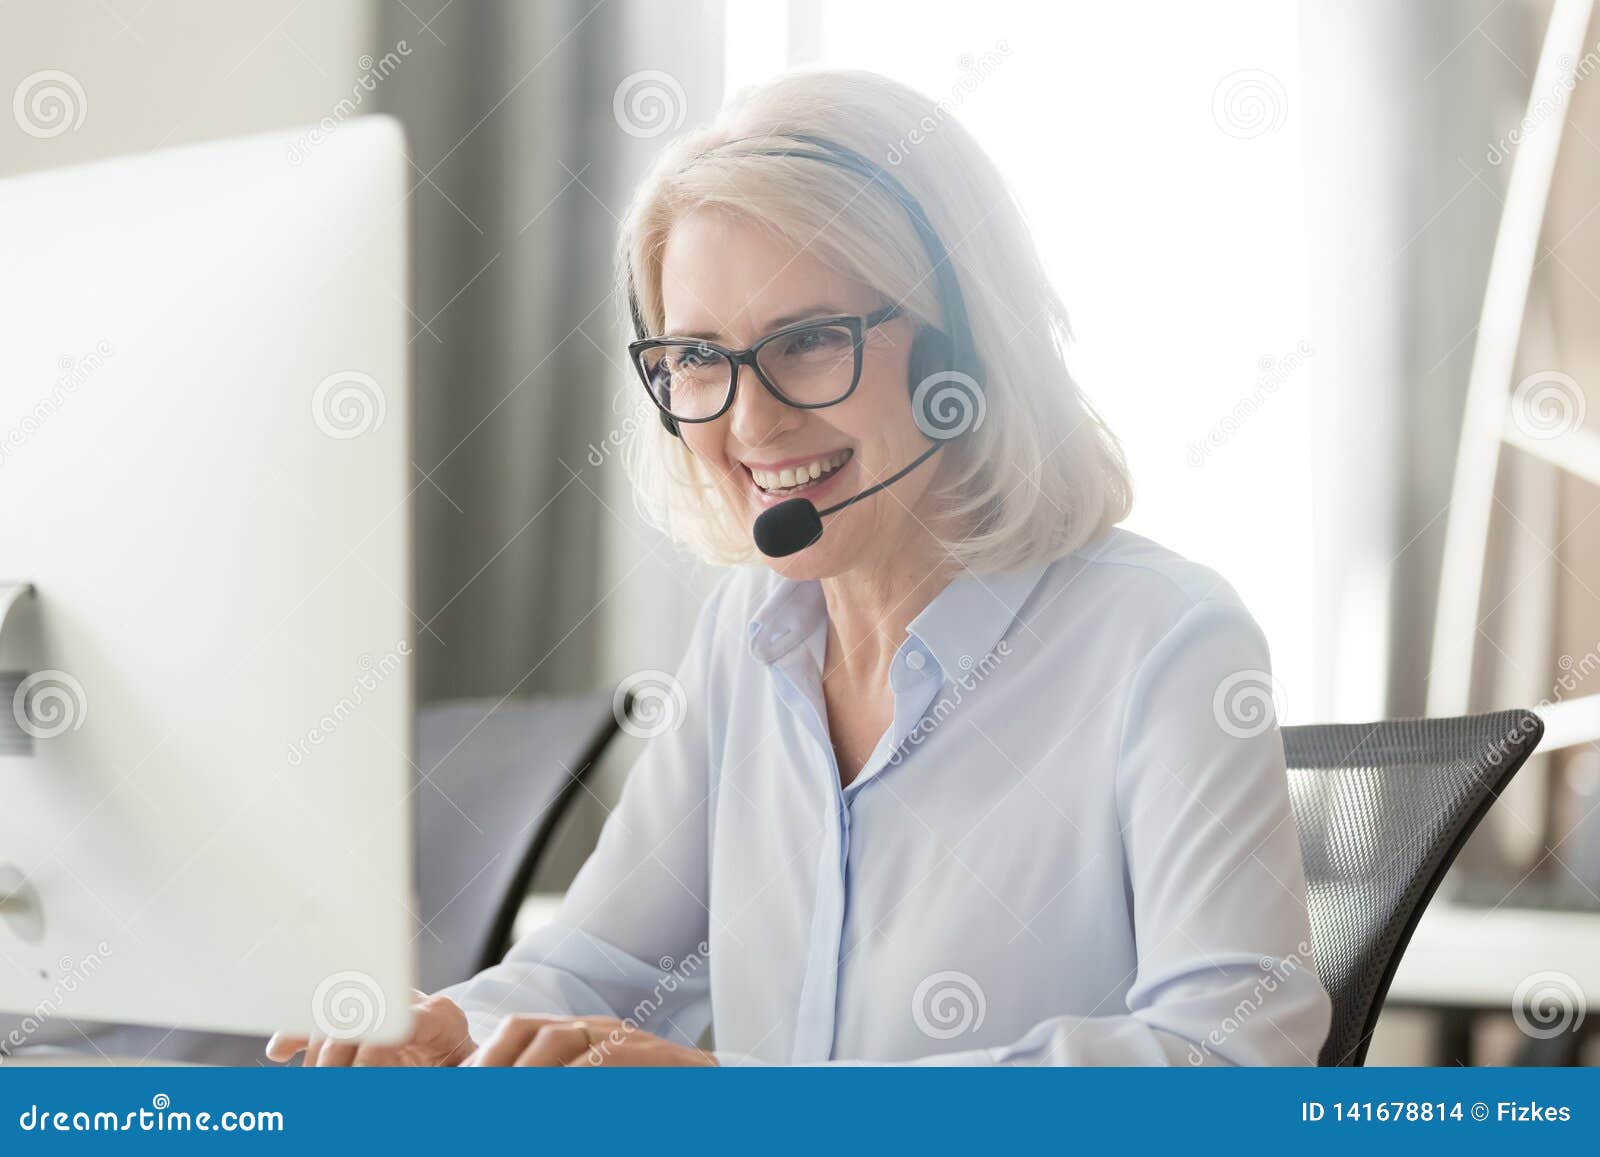 happy old businesswoman in headset making call looking at computer